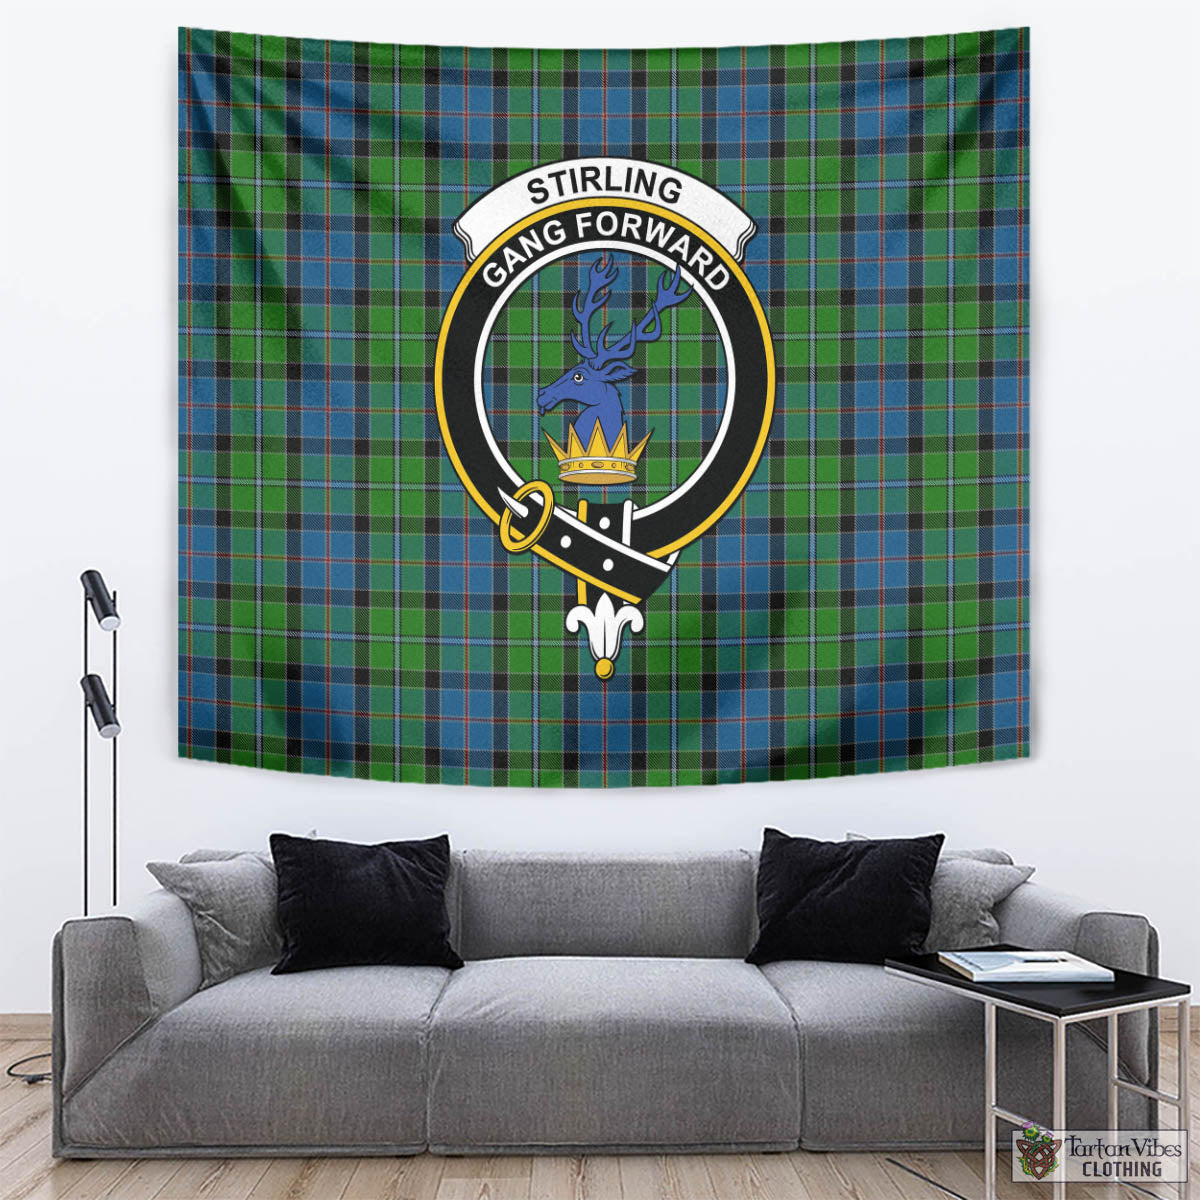 Tartan Vibes Clothing Stirling Tartan Tapestry Wall Hanging and Home Decor for Room with Family Crest